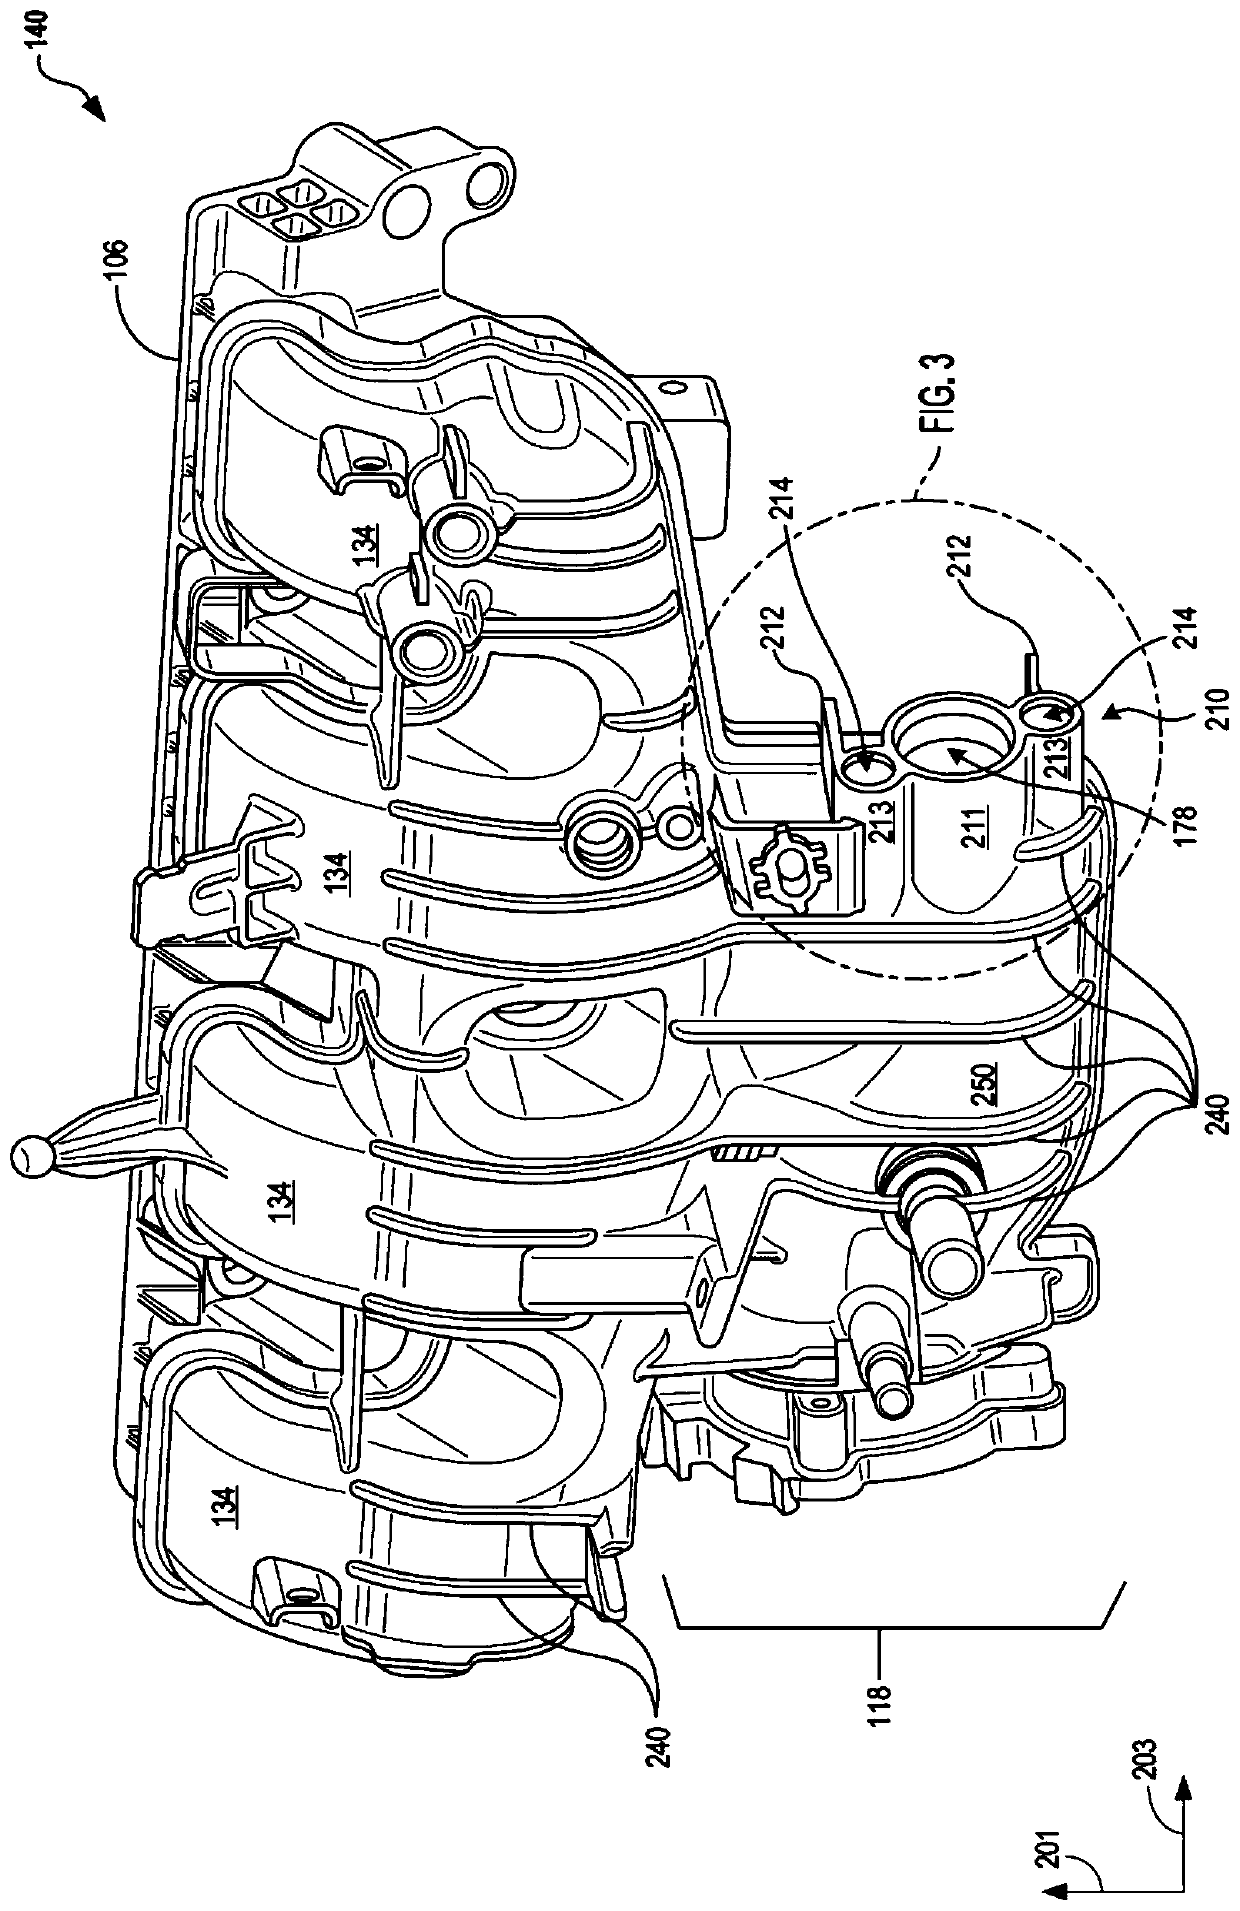 System for exhaust gas recirculation tube alignment